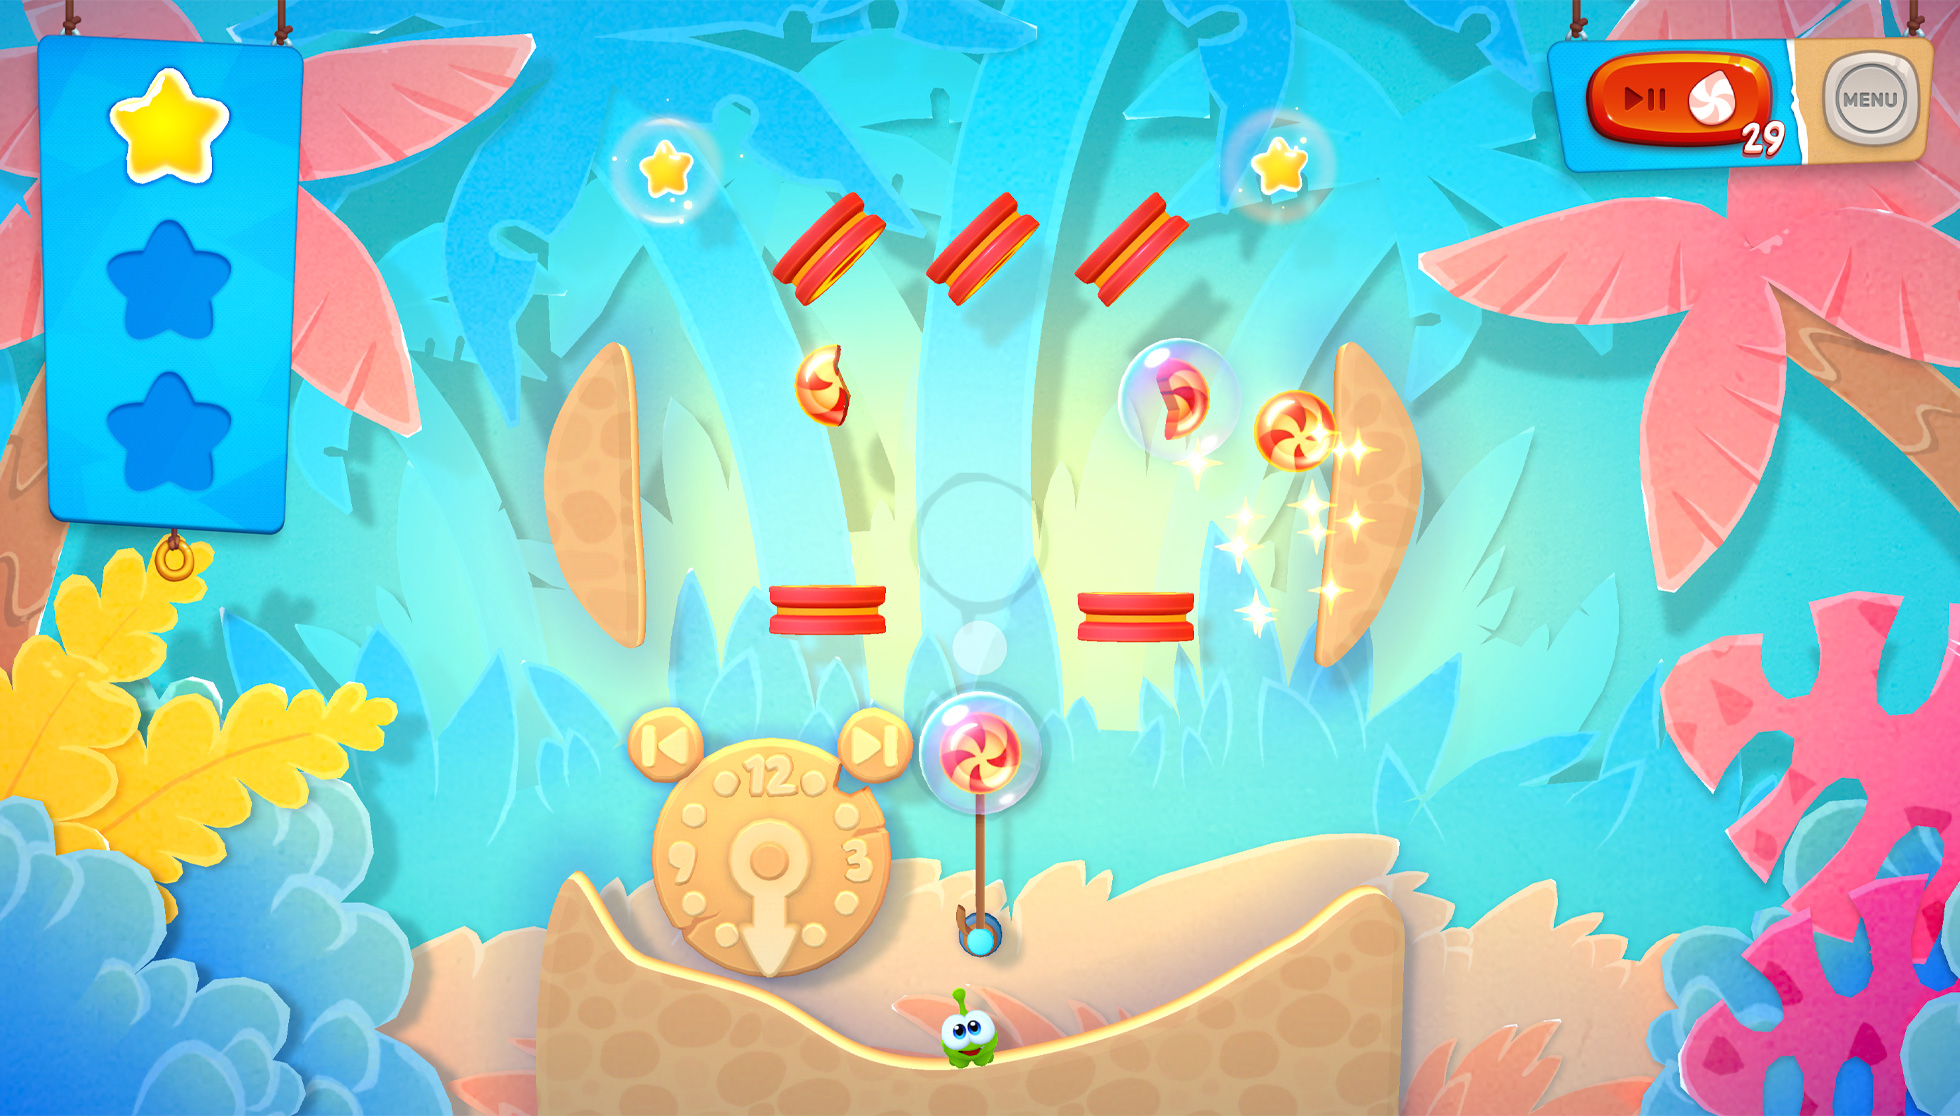 apple arcade launches more than 130 award winning games cut the rope remastered 040221